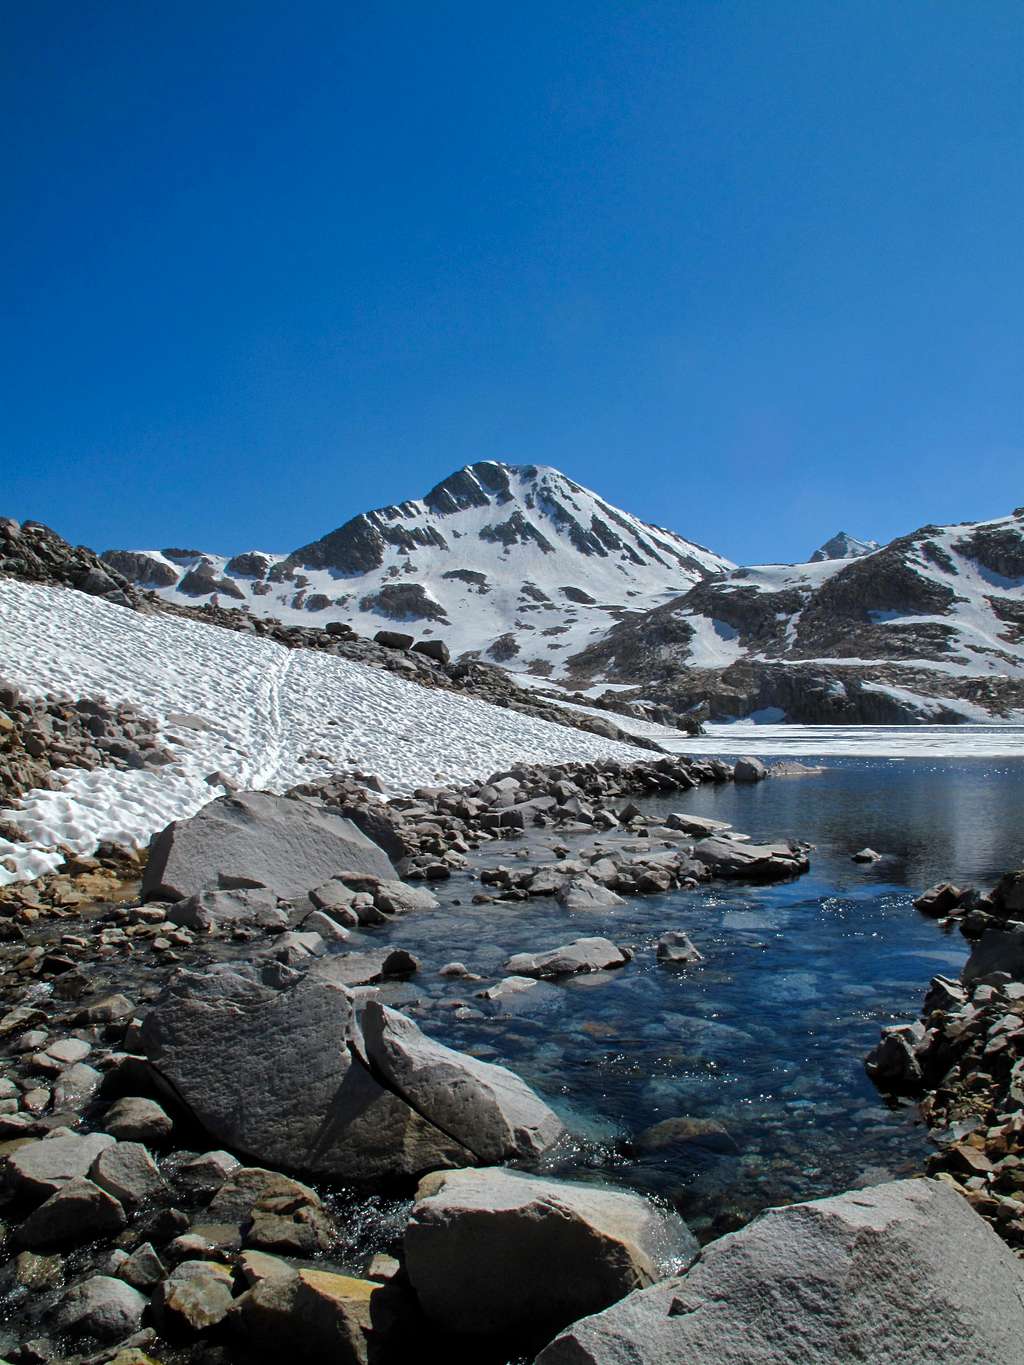 Mount Solomons from the Helen Lake outlet